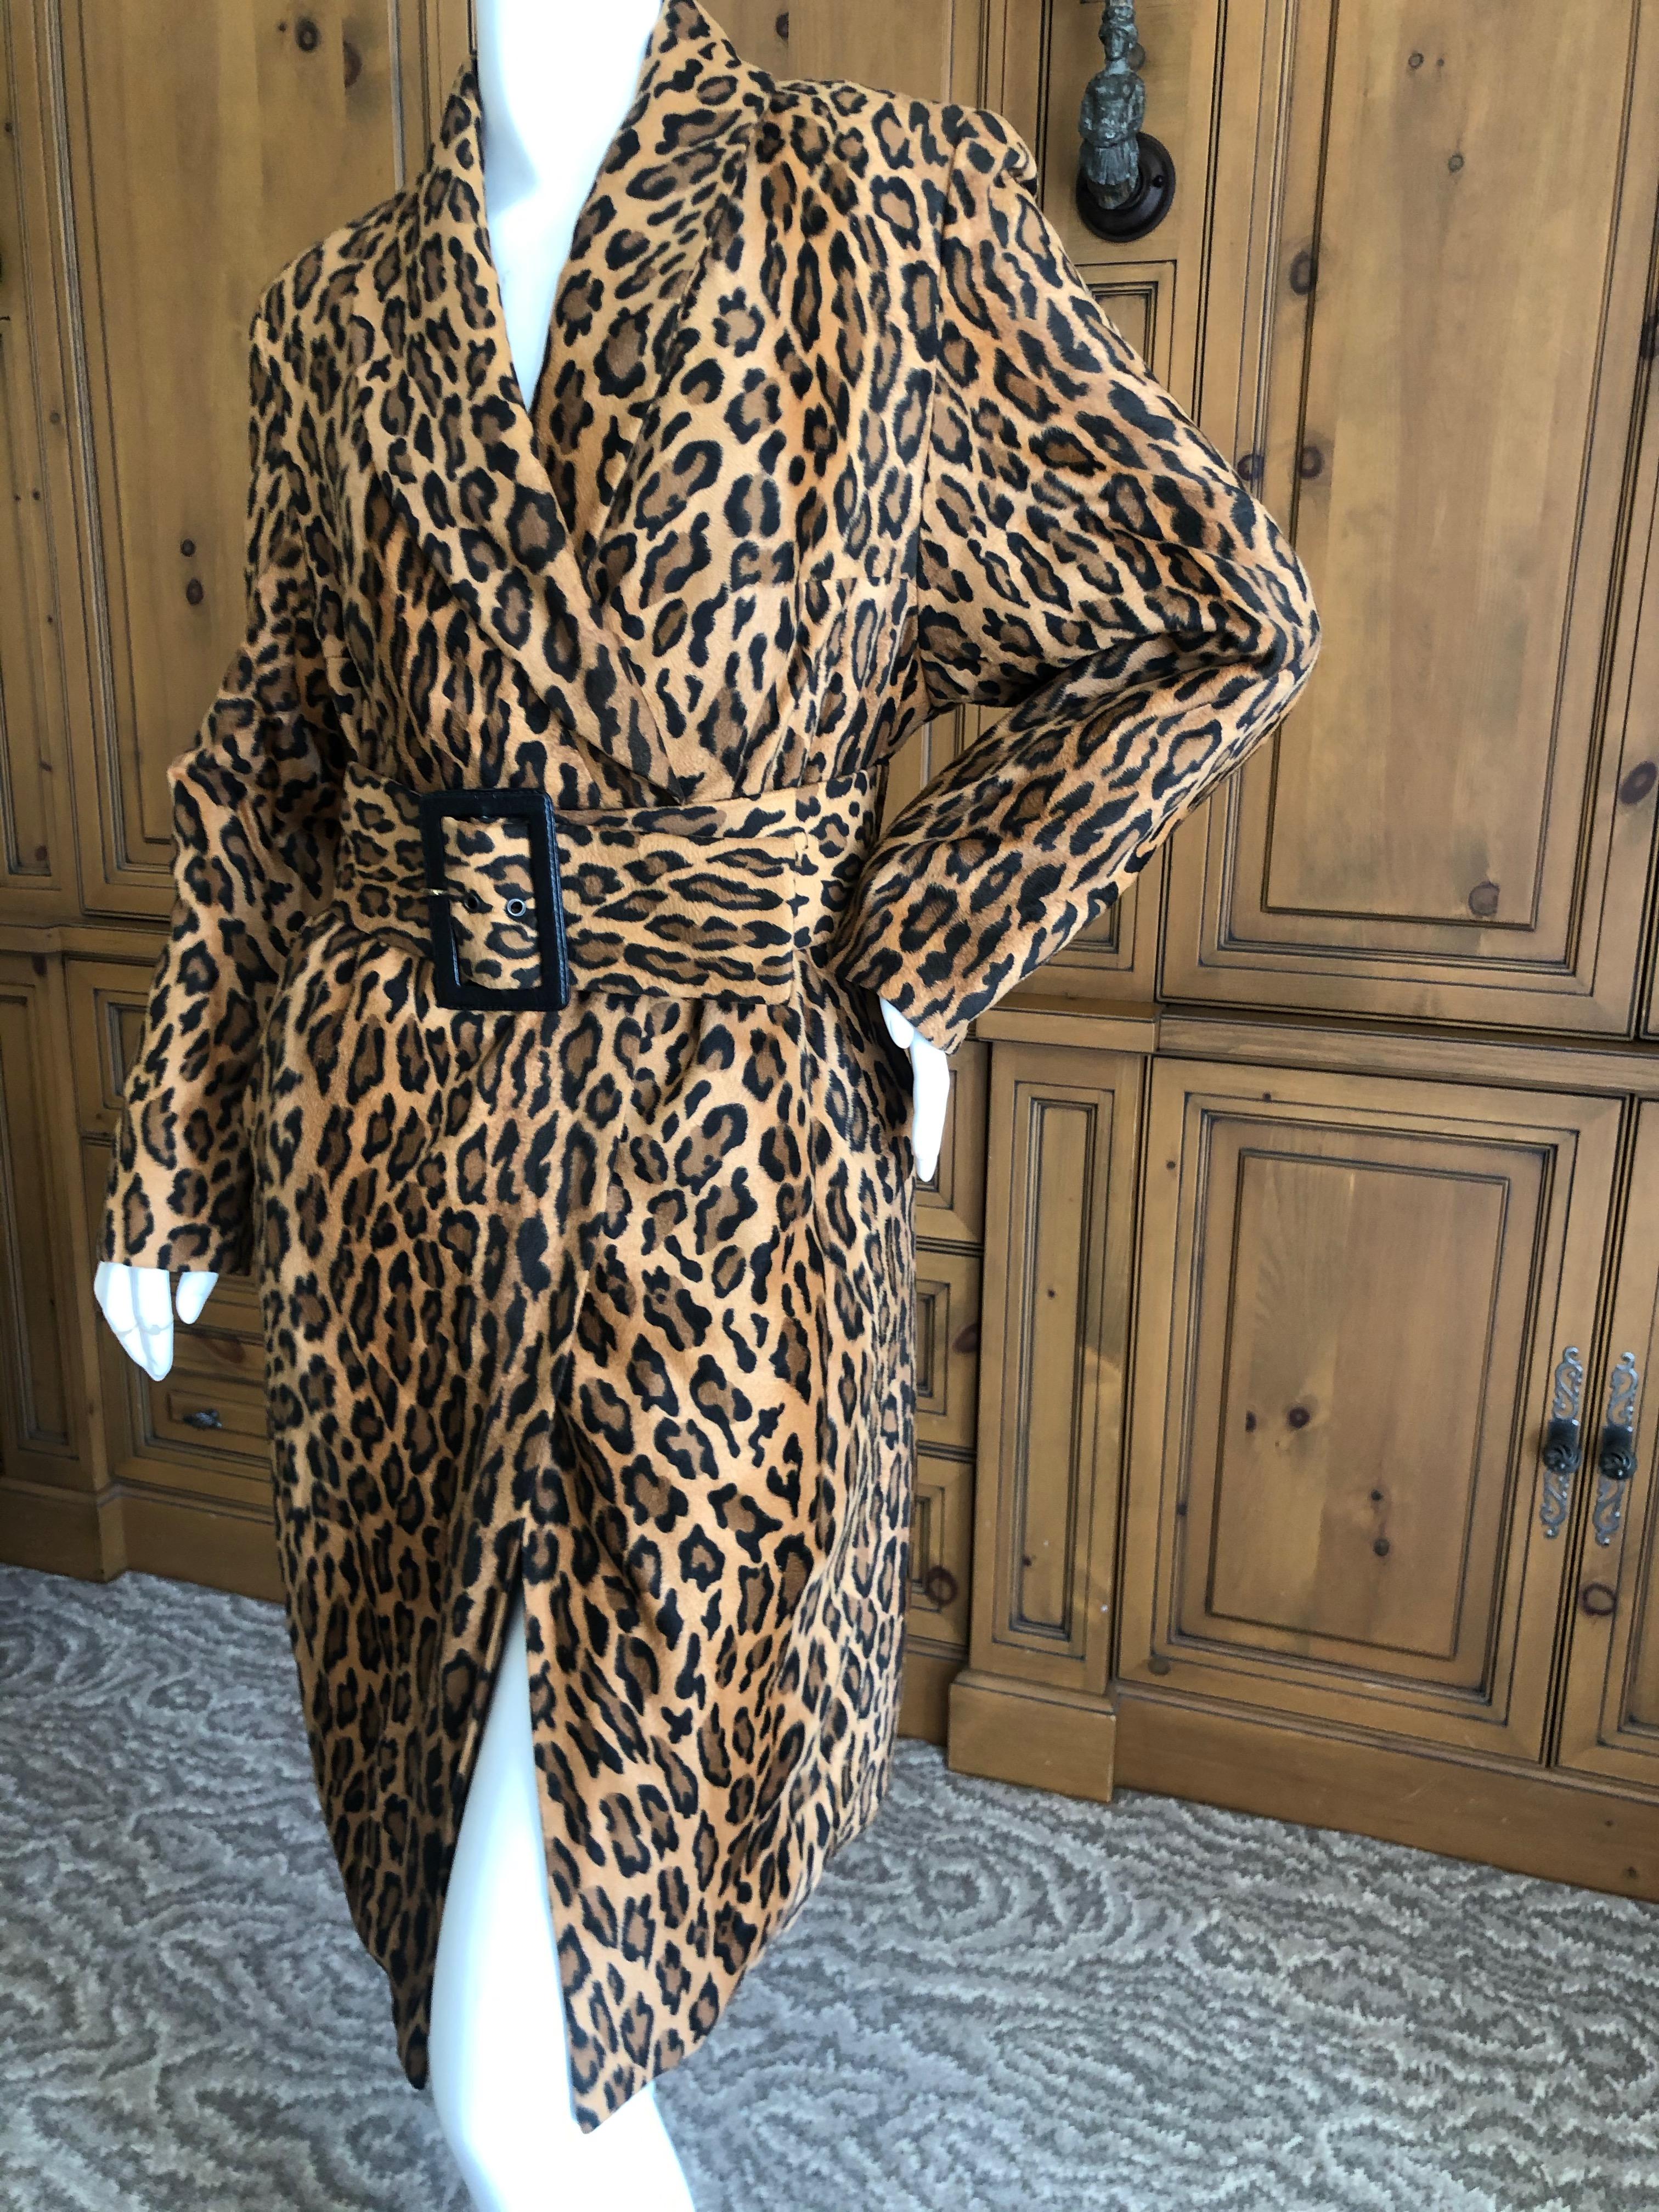 Max Mara Leopard Print Plush Velvet Shawl Collar Belted Coat with Quilted Lining.
This is so great, very soft and luxurious, plush velvet.
The belt has a leather covered buckle.
There is no size tag, I would estimate it size 42
Bust 42